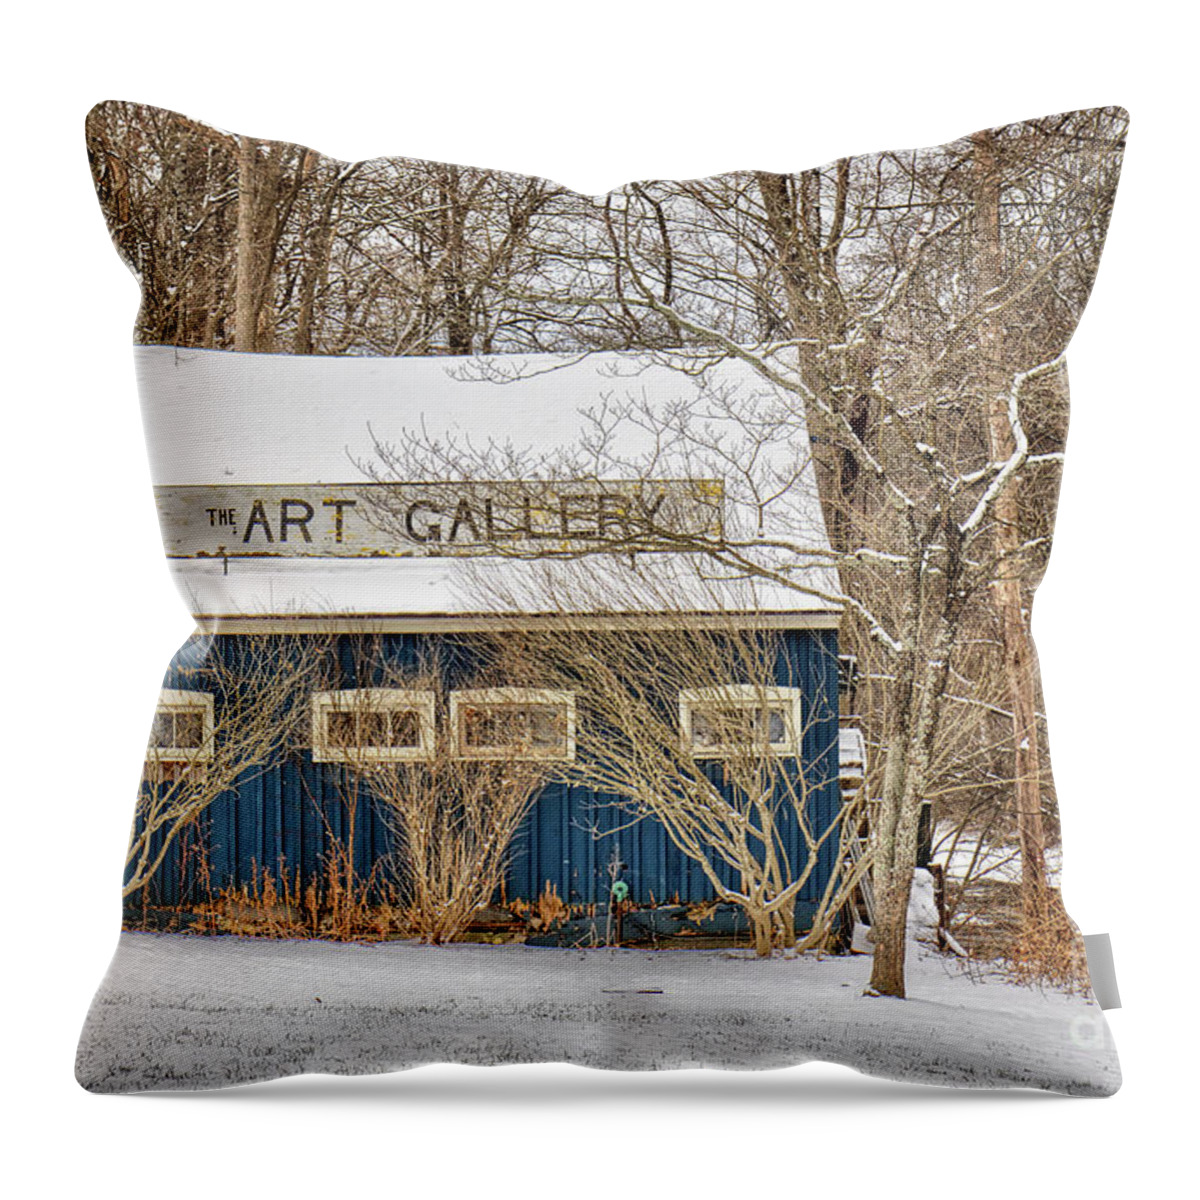 Art Gallery Throw Pillow featuring the photograph The Art Gallery by Rick Kuperberg Sr